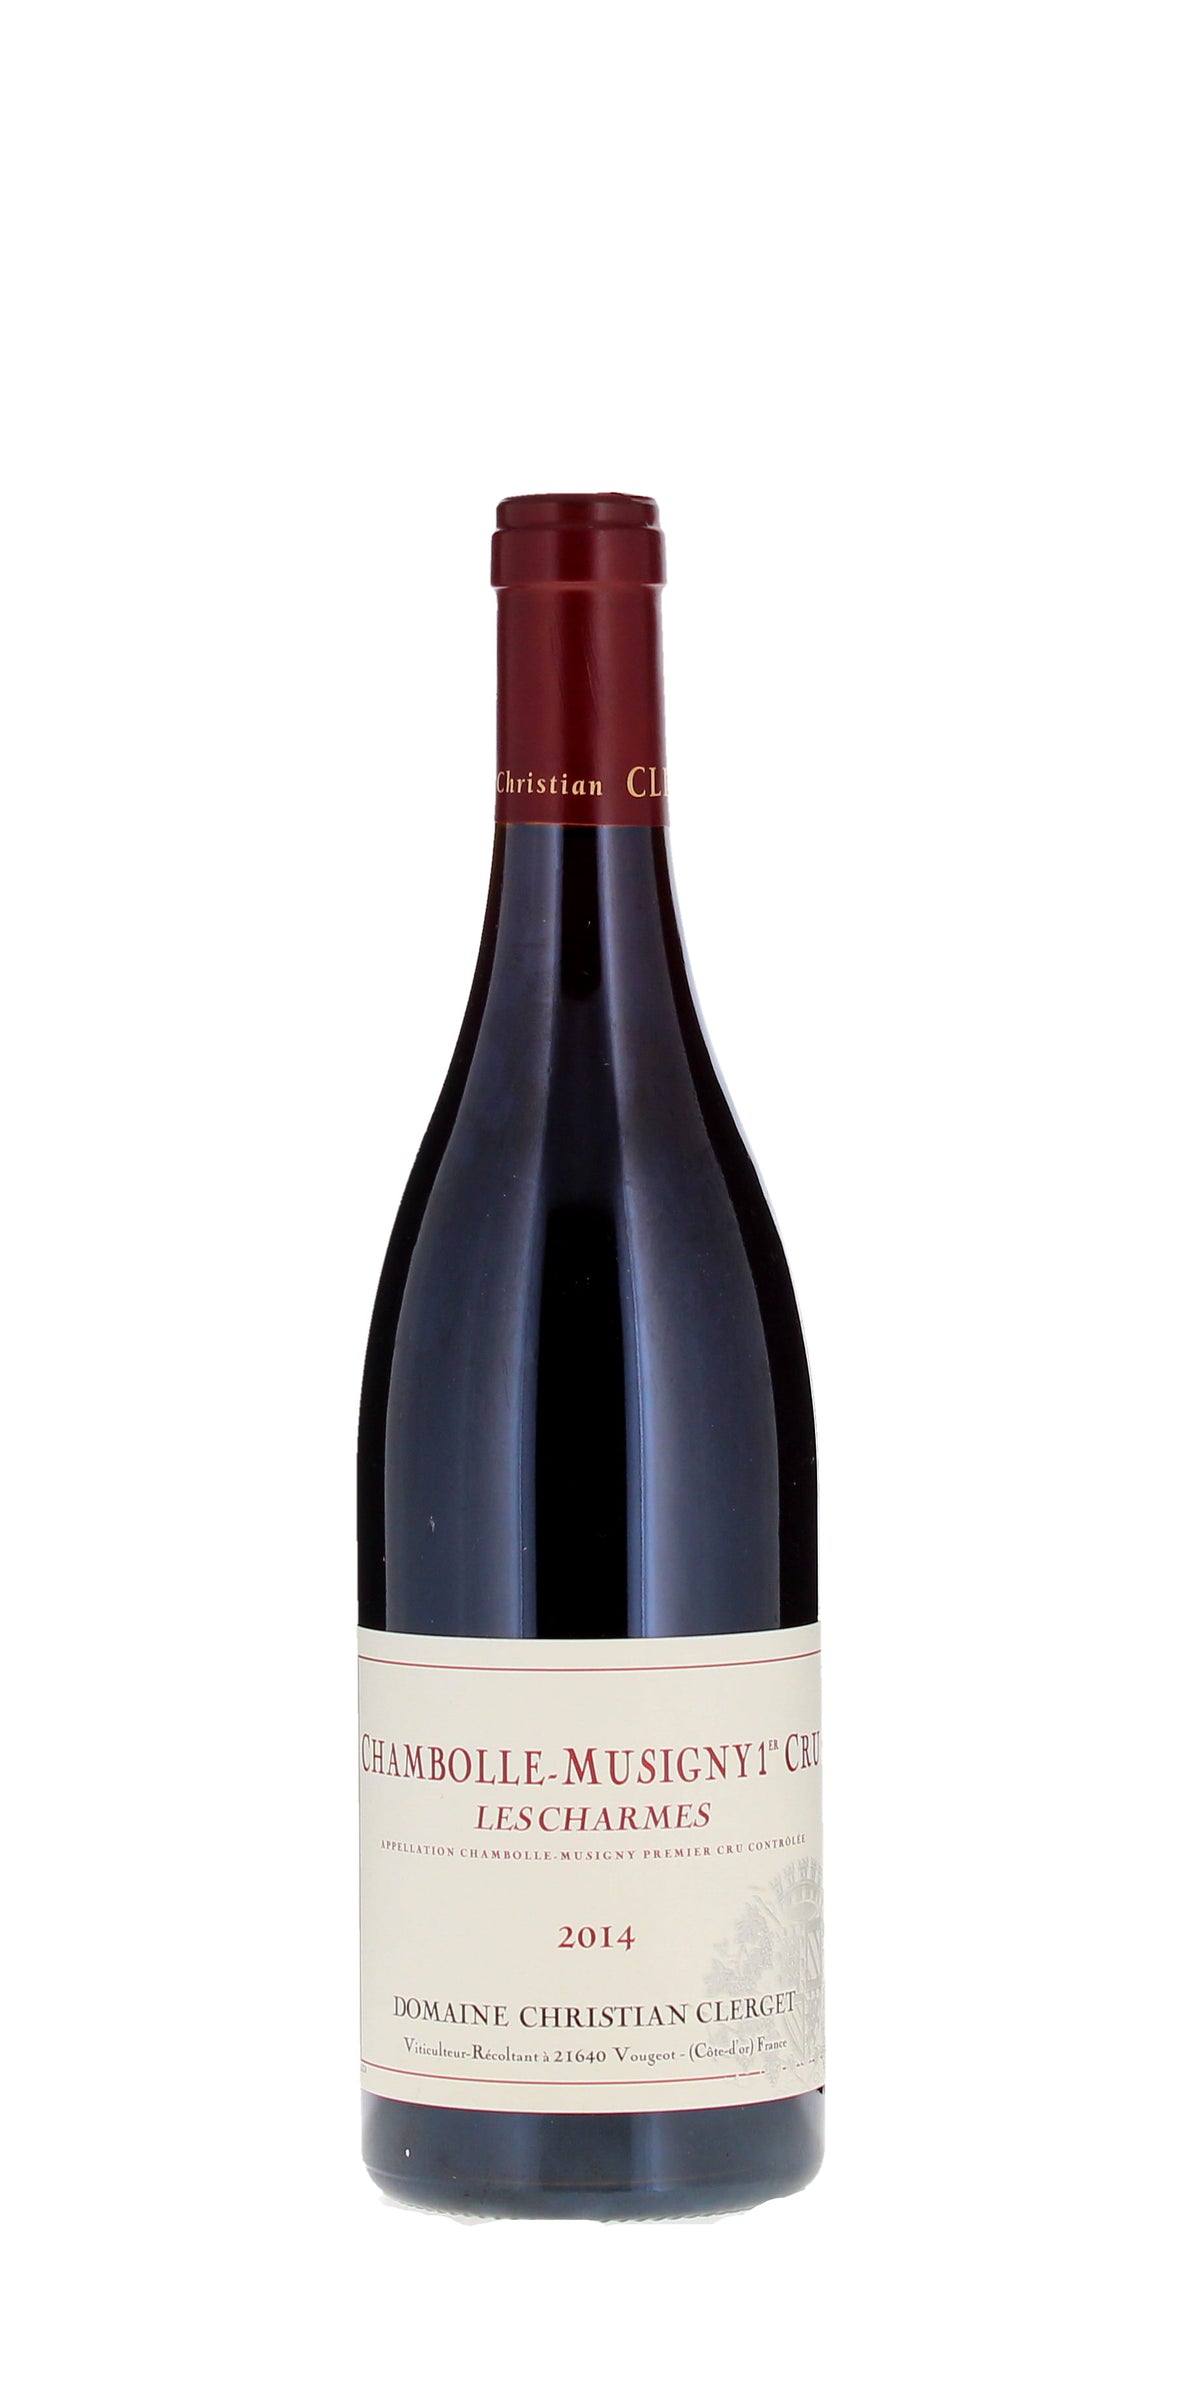 Domaine Christian Clerget Les Charmes, Chambolle-Musigny Premier Cru, 2014